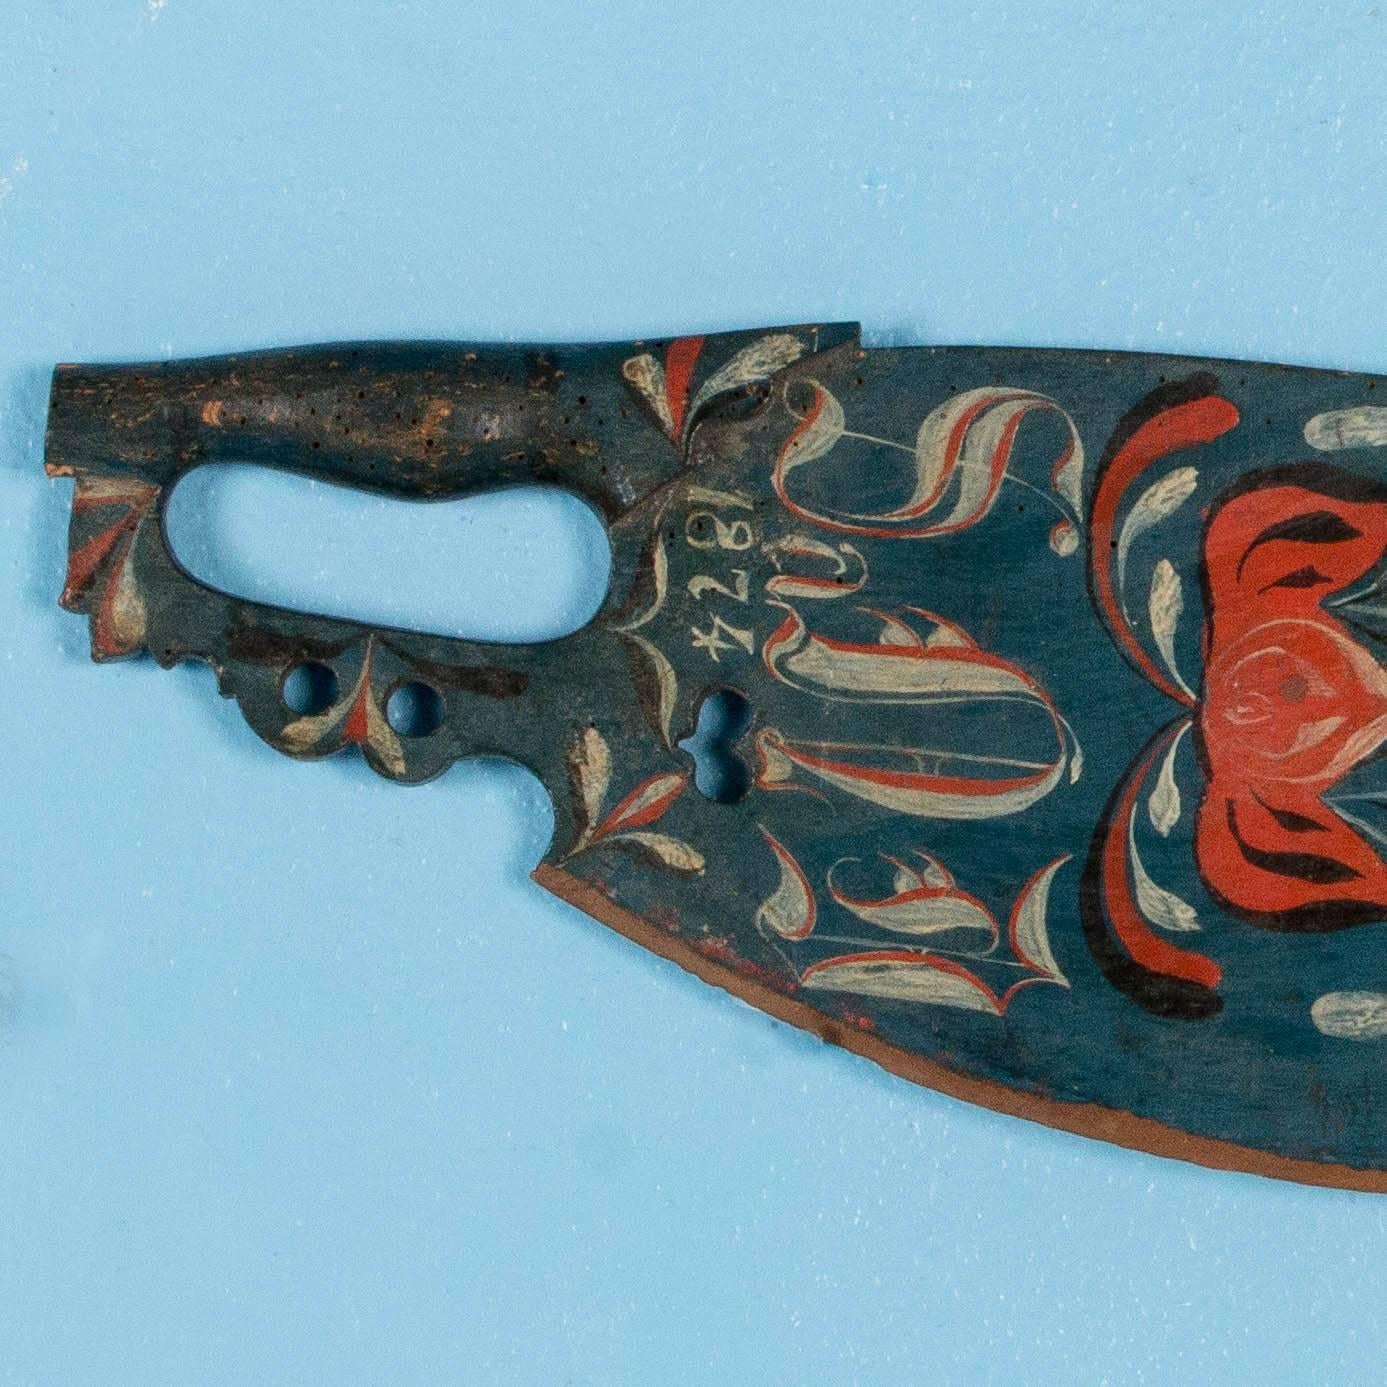 This hand-carved skaktetra was traditionally given away as a bridal gift, usually with beautiful painted decorations and often dated. This one has the date 1874 with a red and green floral decoration on a deep blue background. Originally these were